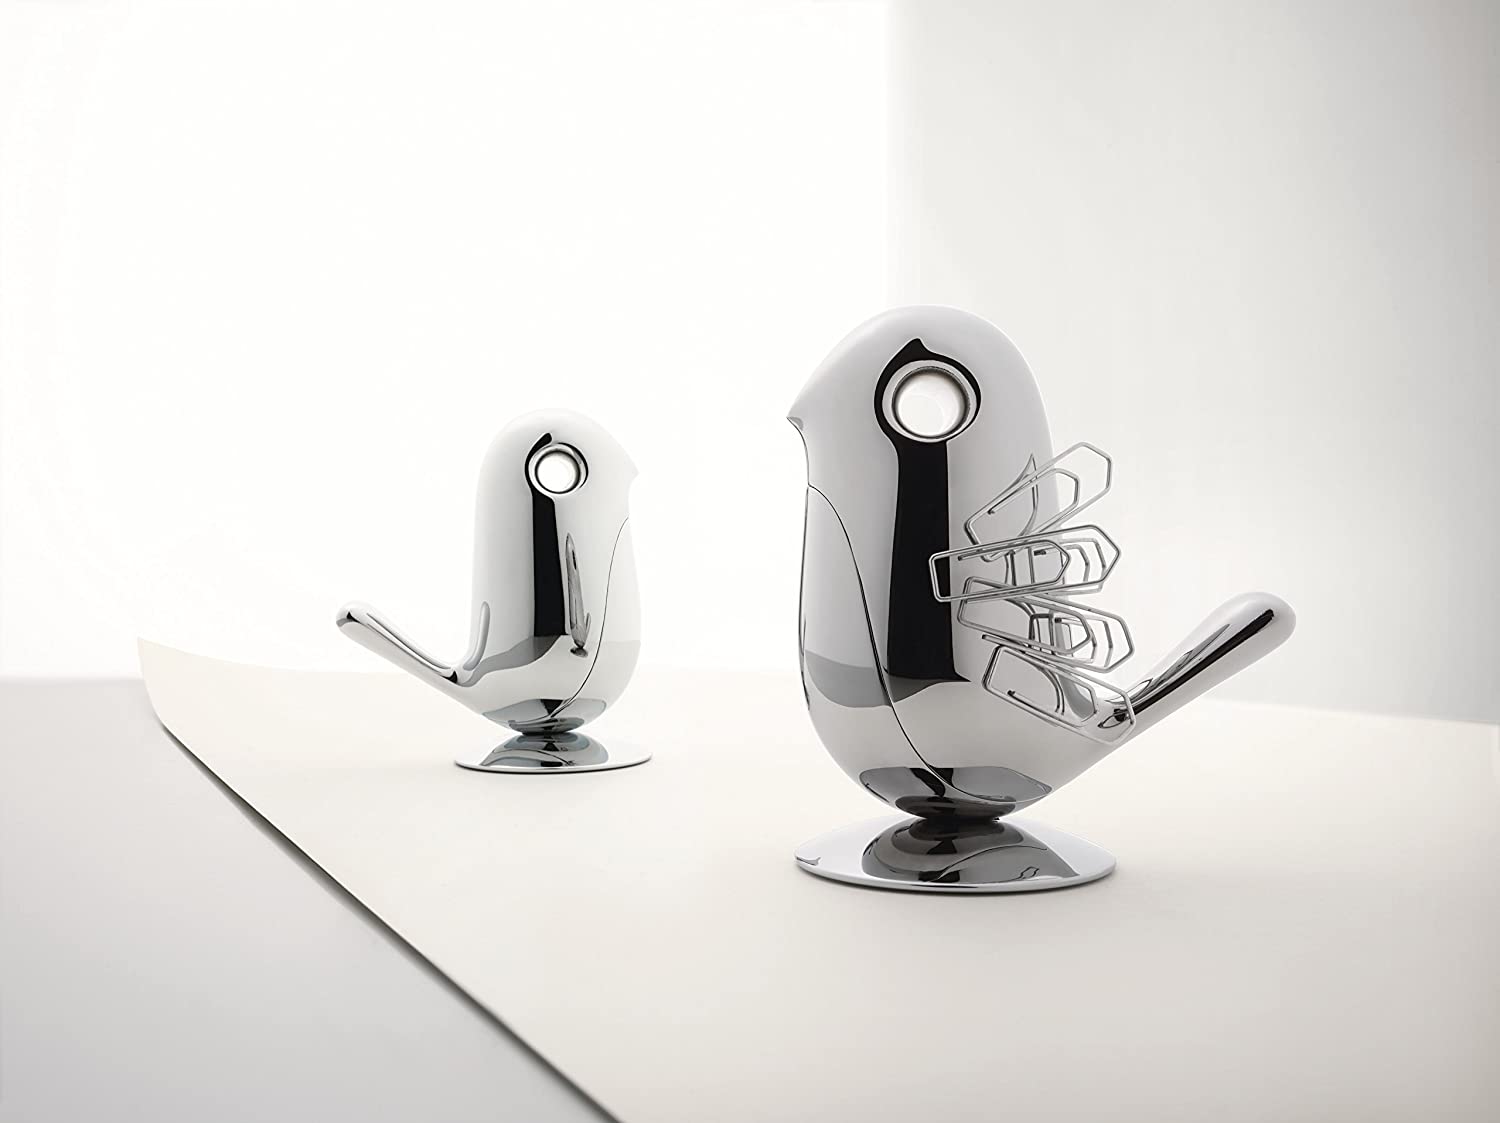 Alessi "Chip Magnetic Paper Clip Holder in Chrome Plated Zamak